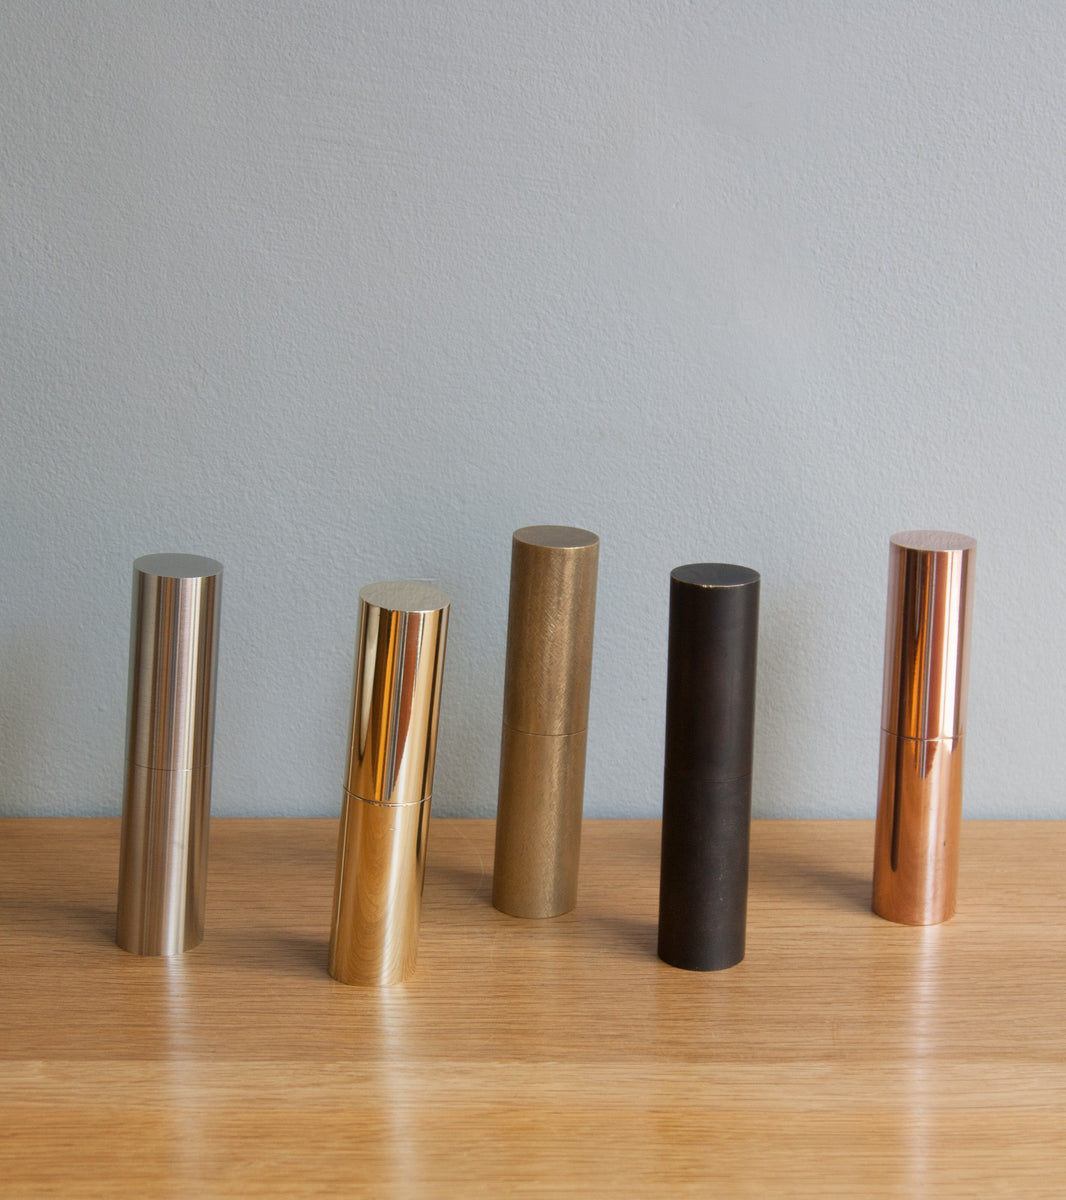 Italic Mill - Copper Plated Michael Anastassiades & Carl Auböck (Variety View)